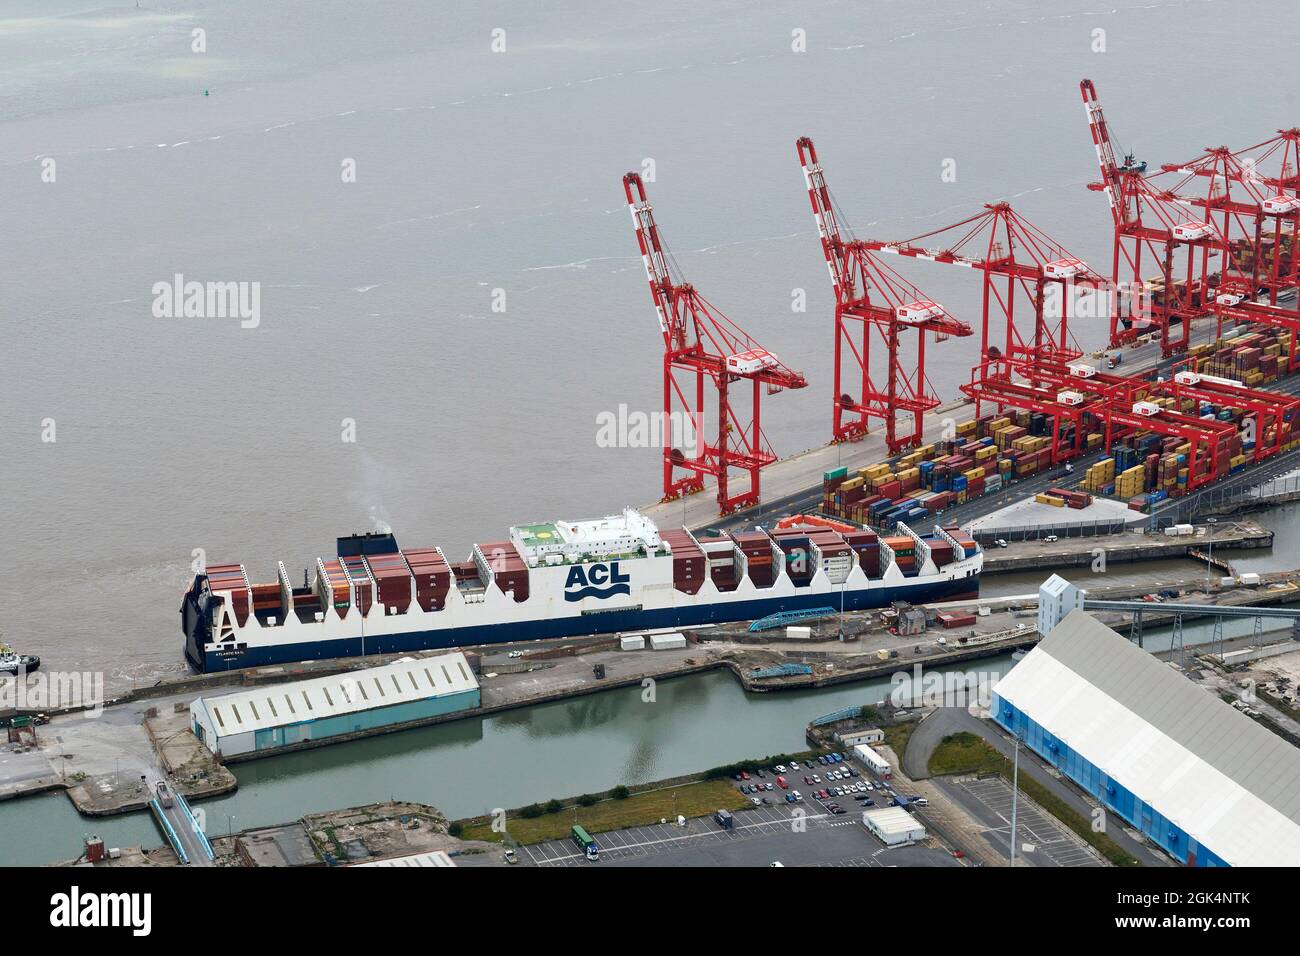 Ship entering the lock at Seaforth Docks, Port of Liverpool, Merseyside, North West England, UK Stock Photo